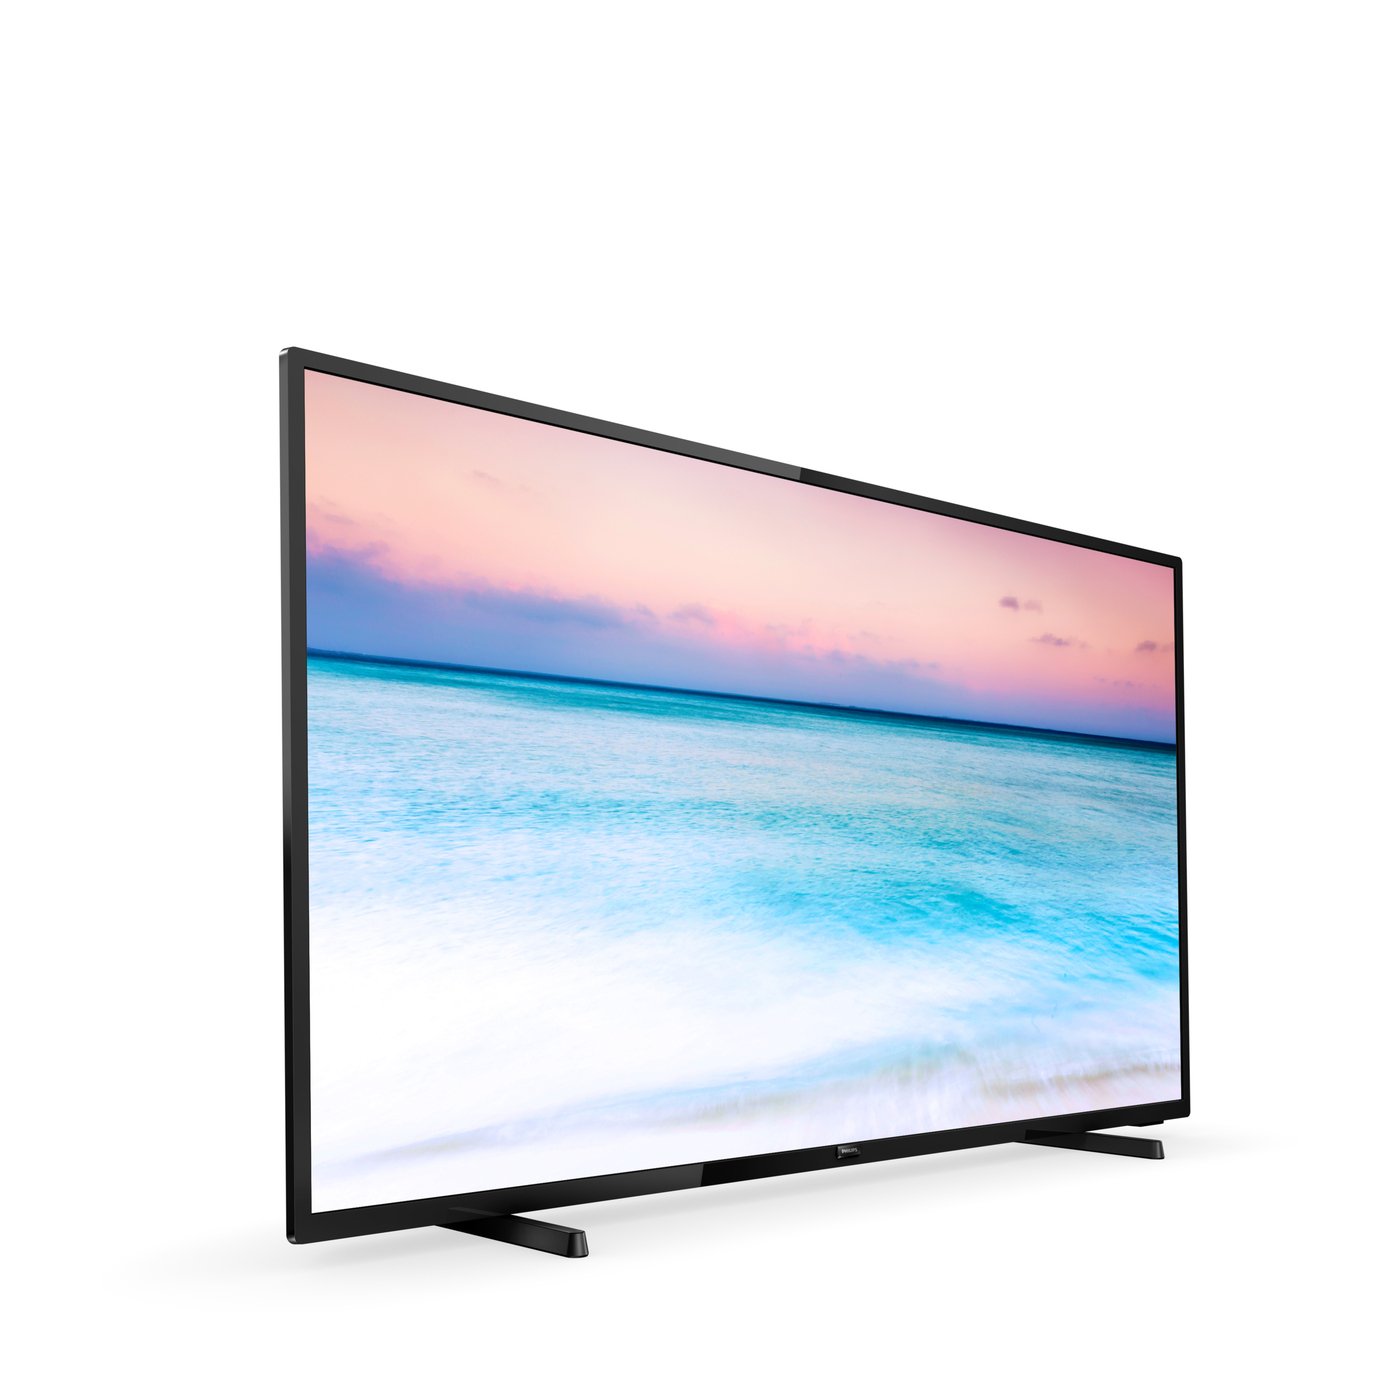 Philips 70 Inch 70PUS6504 Smart 4K LED TV with HDR Review